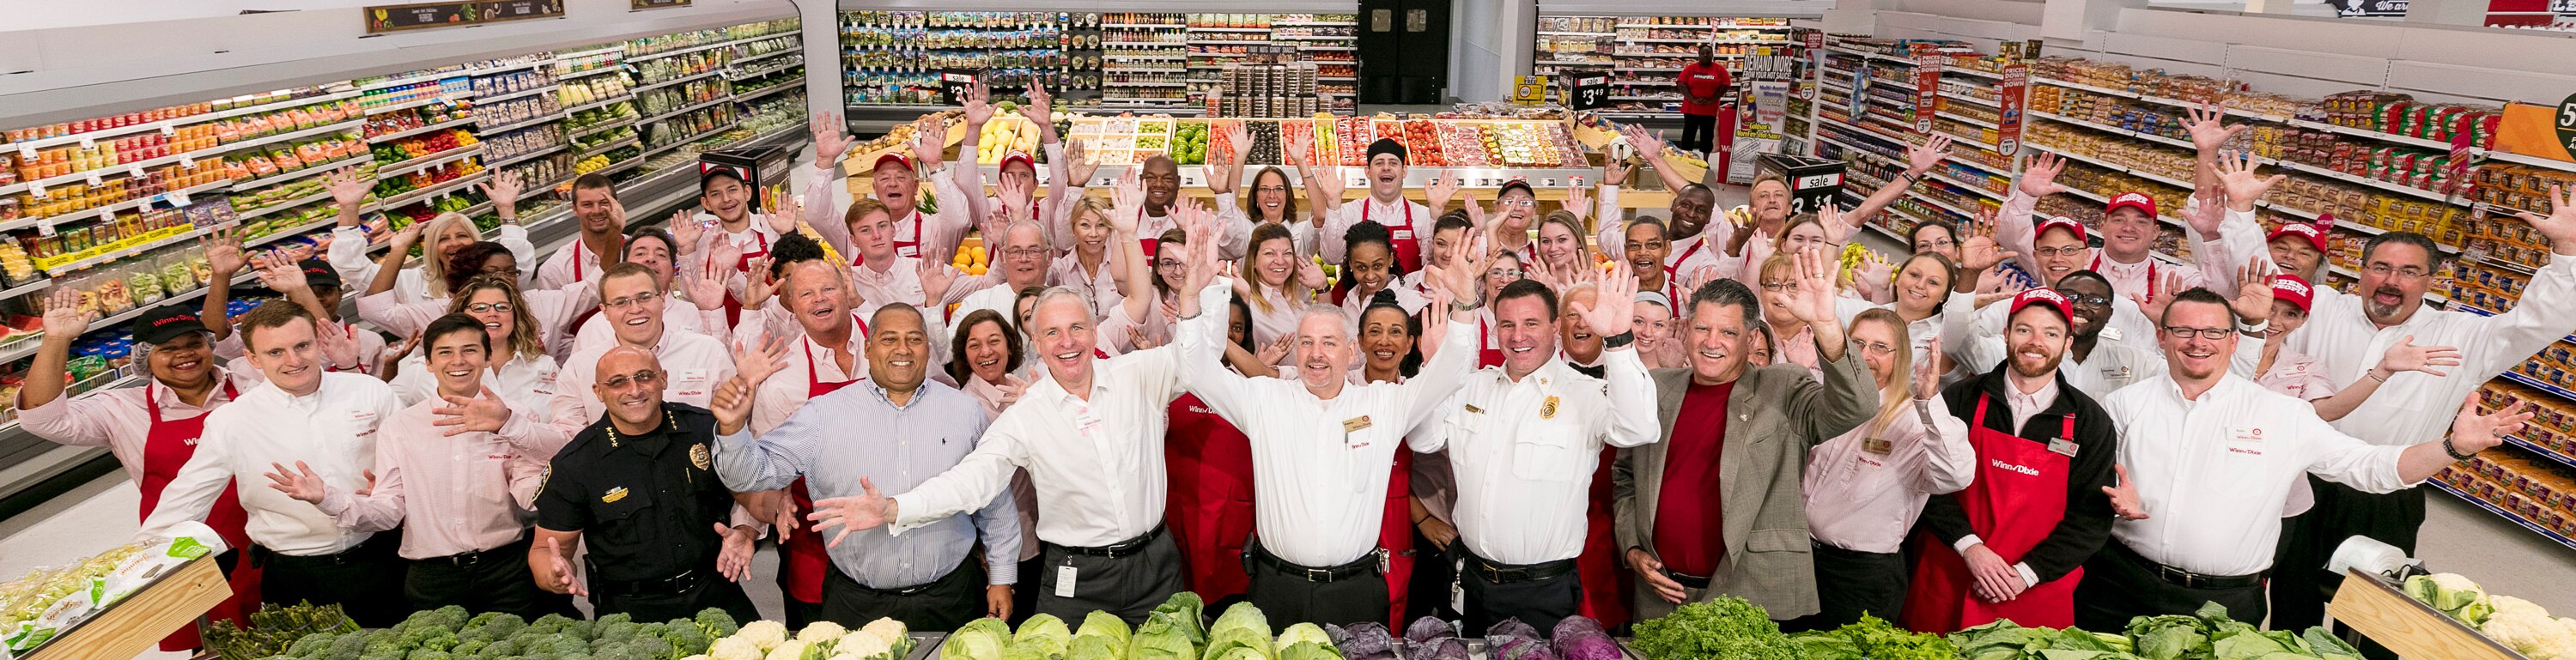 Group of Winn-Dixie Associates cheering at a grand opening.